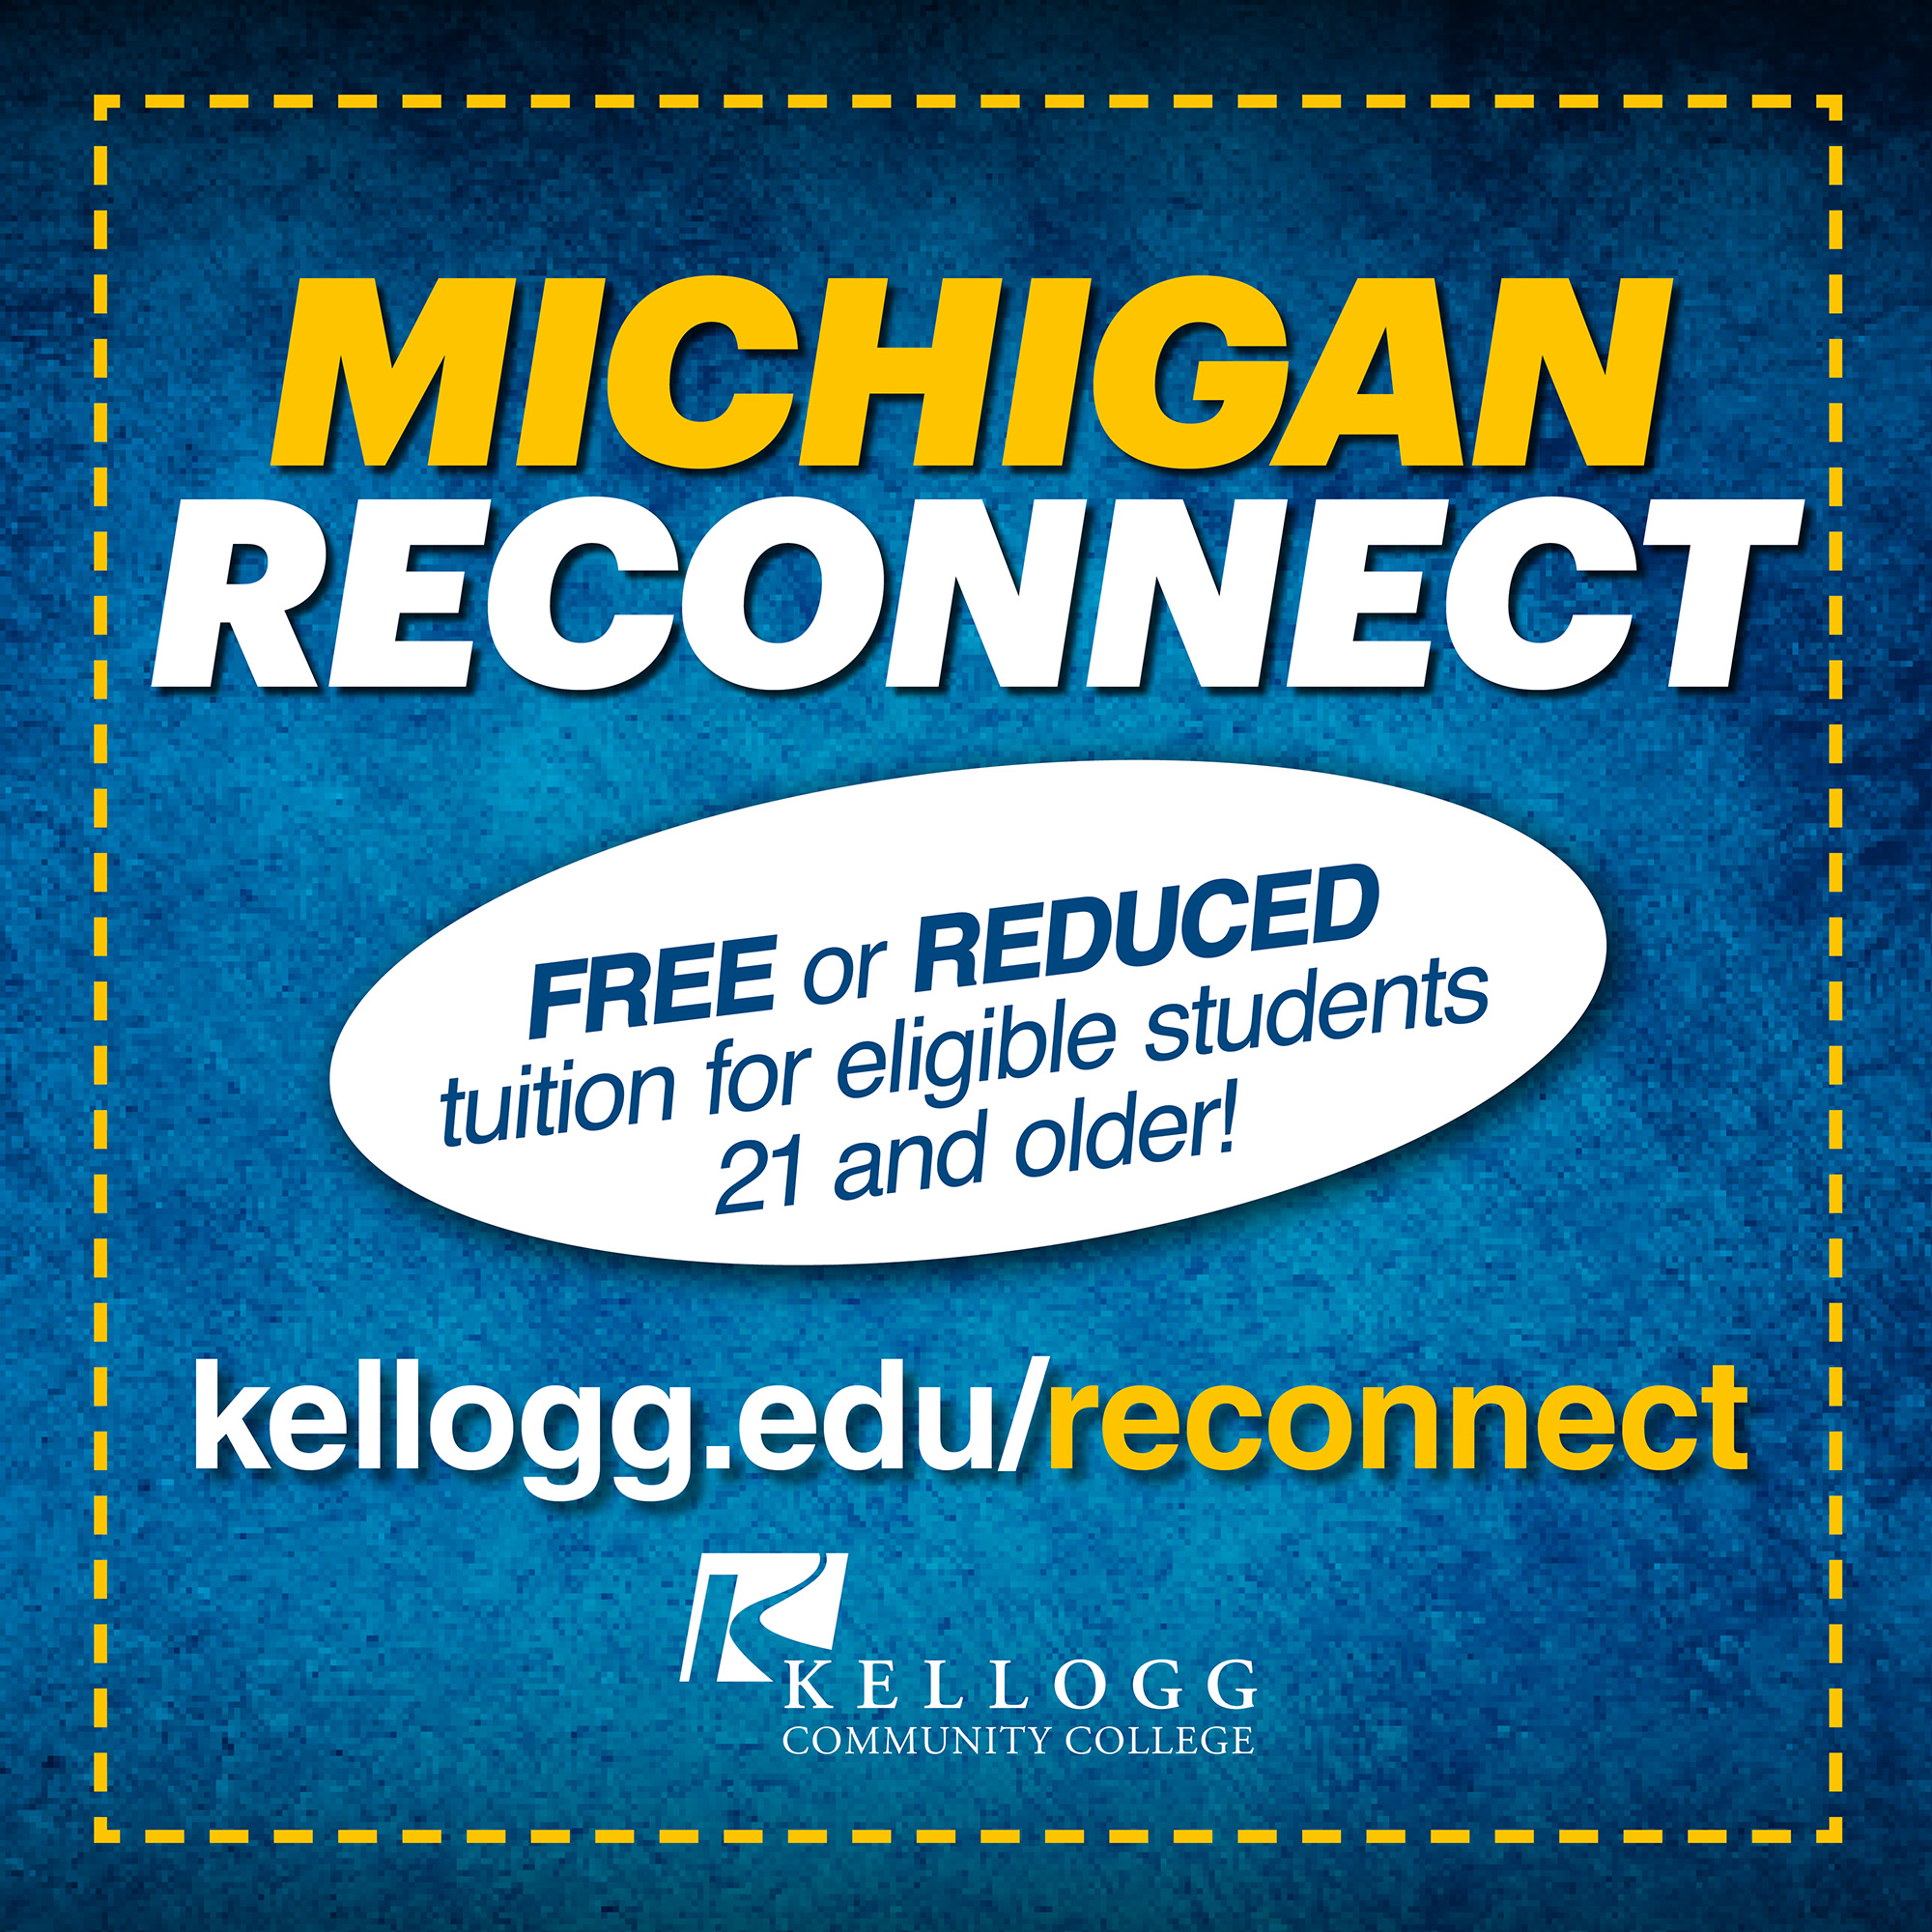 A text graphic that reads, "Michigan Reconnect. Free or reduced tuition for eligible students 21 and older! kellogg.edu/reconnect."